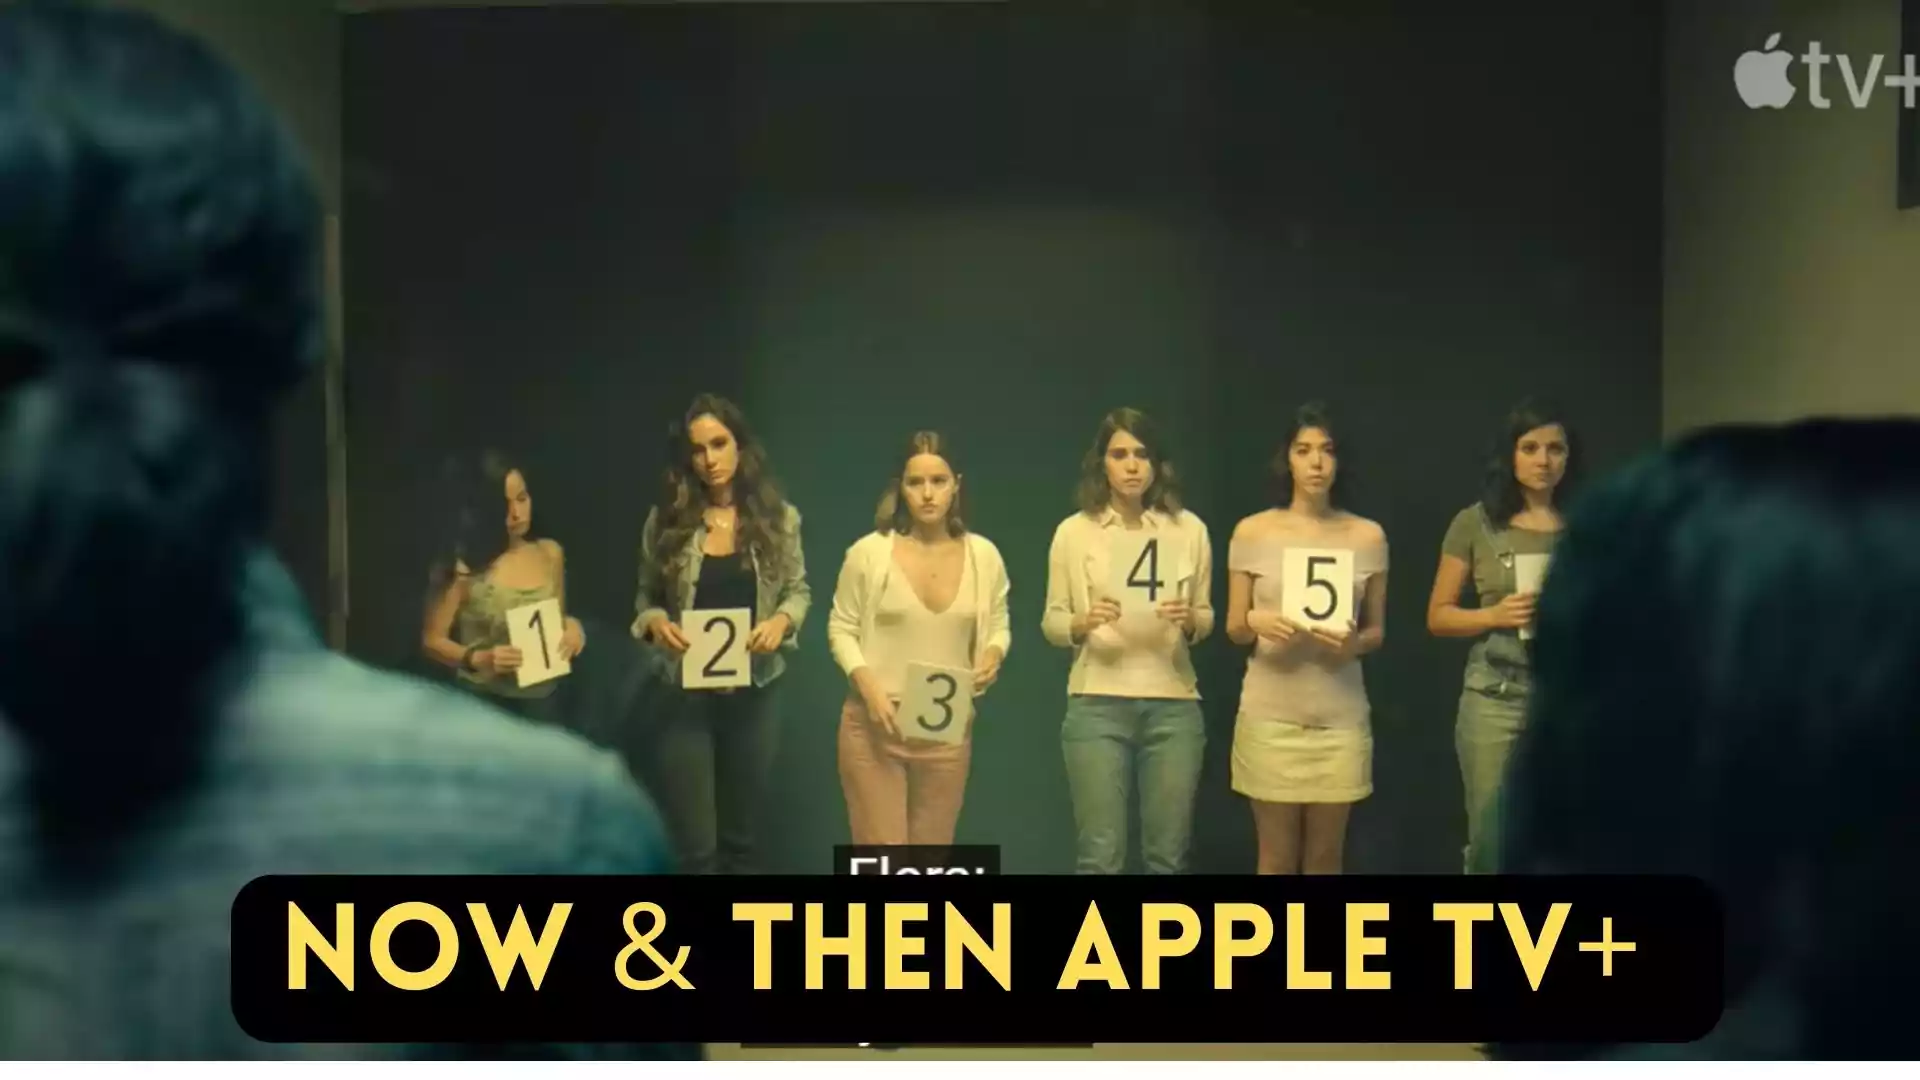 Now and Then Parents Guide. Now and Then Age Rating. Now and Then apple tv+ release date. Now and Then apple tv+ cast, Overview.